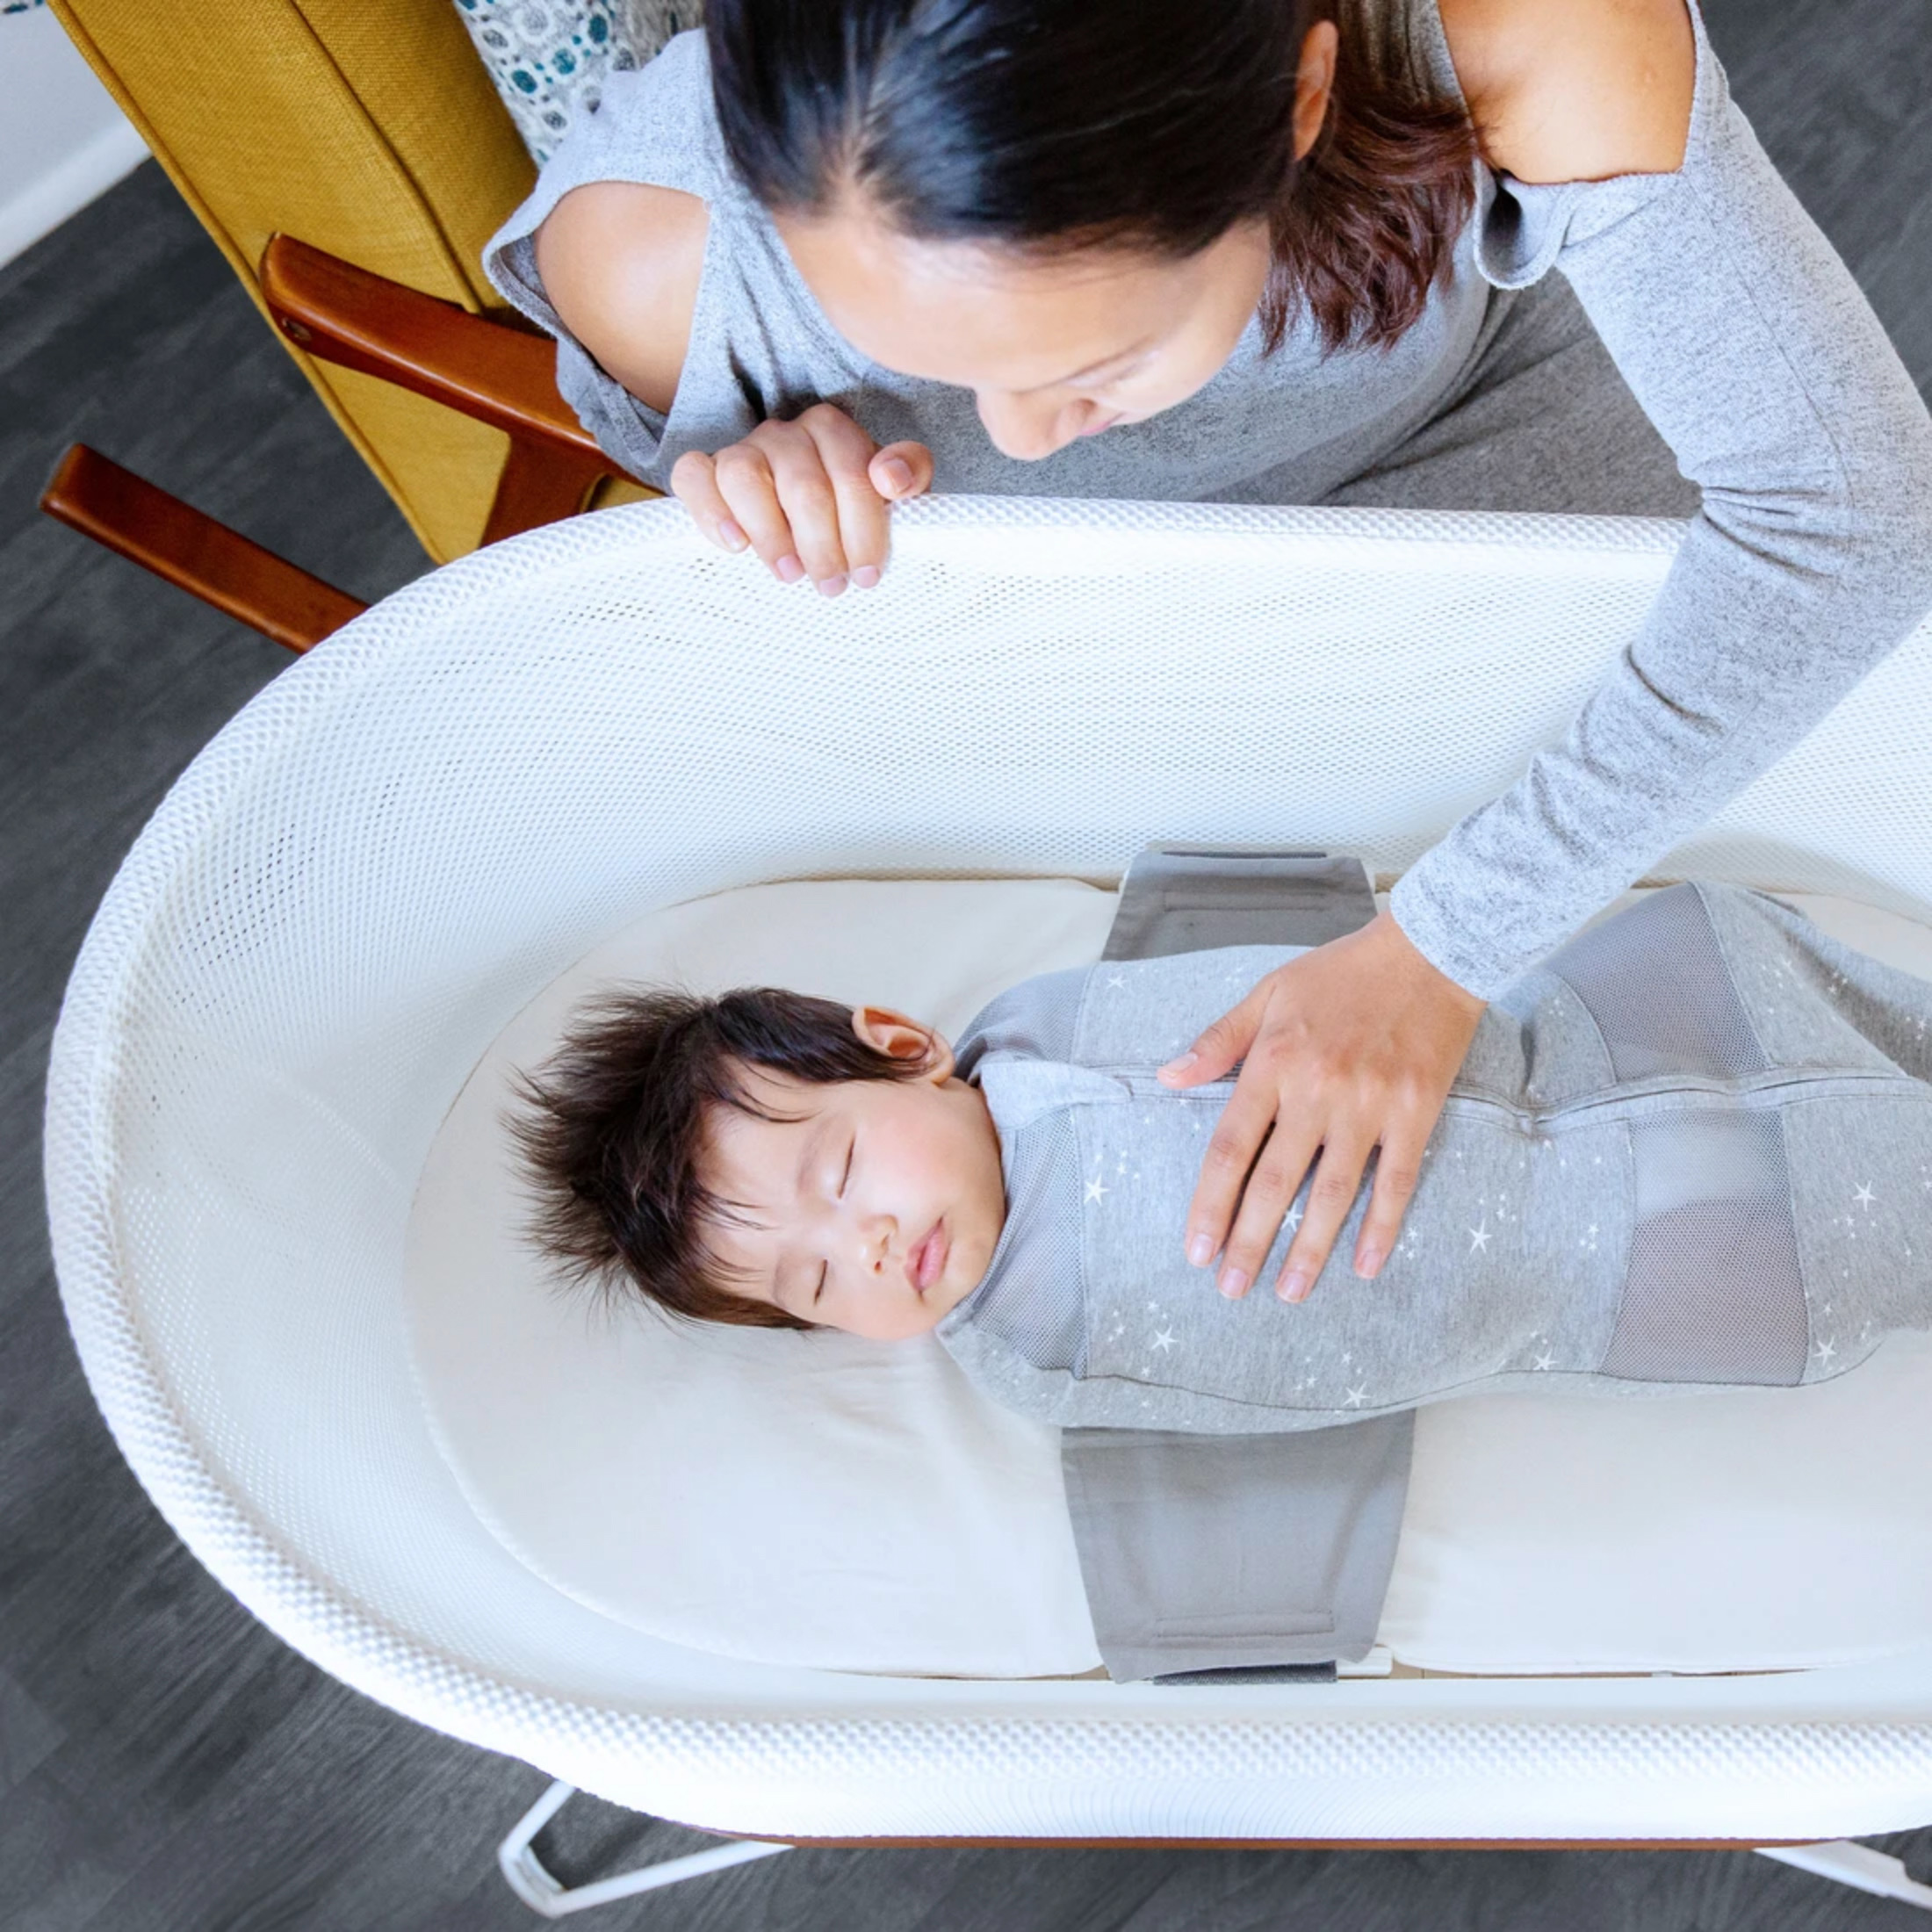 Happiest Baby's SNOO bassinet, which helps babies sleep on their backs. (Courtesy of Happiest Baby)